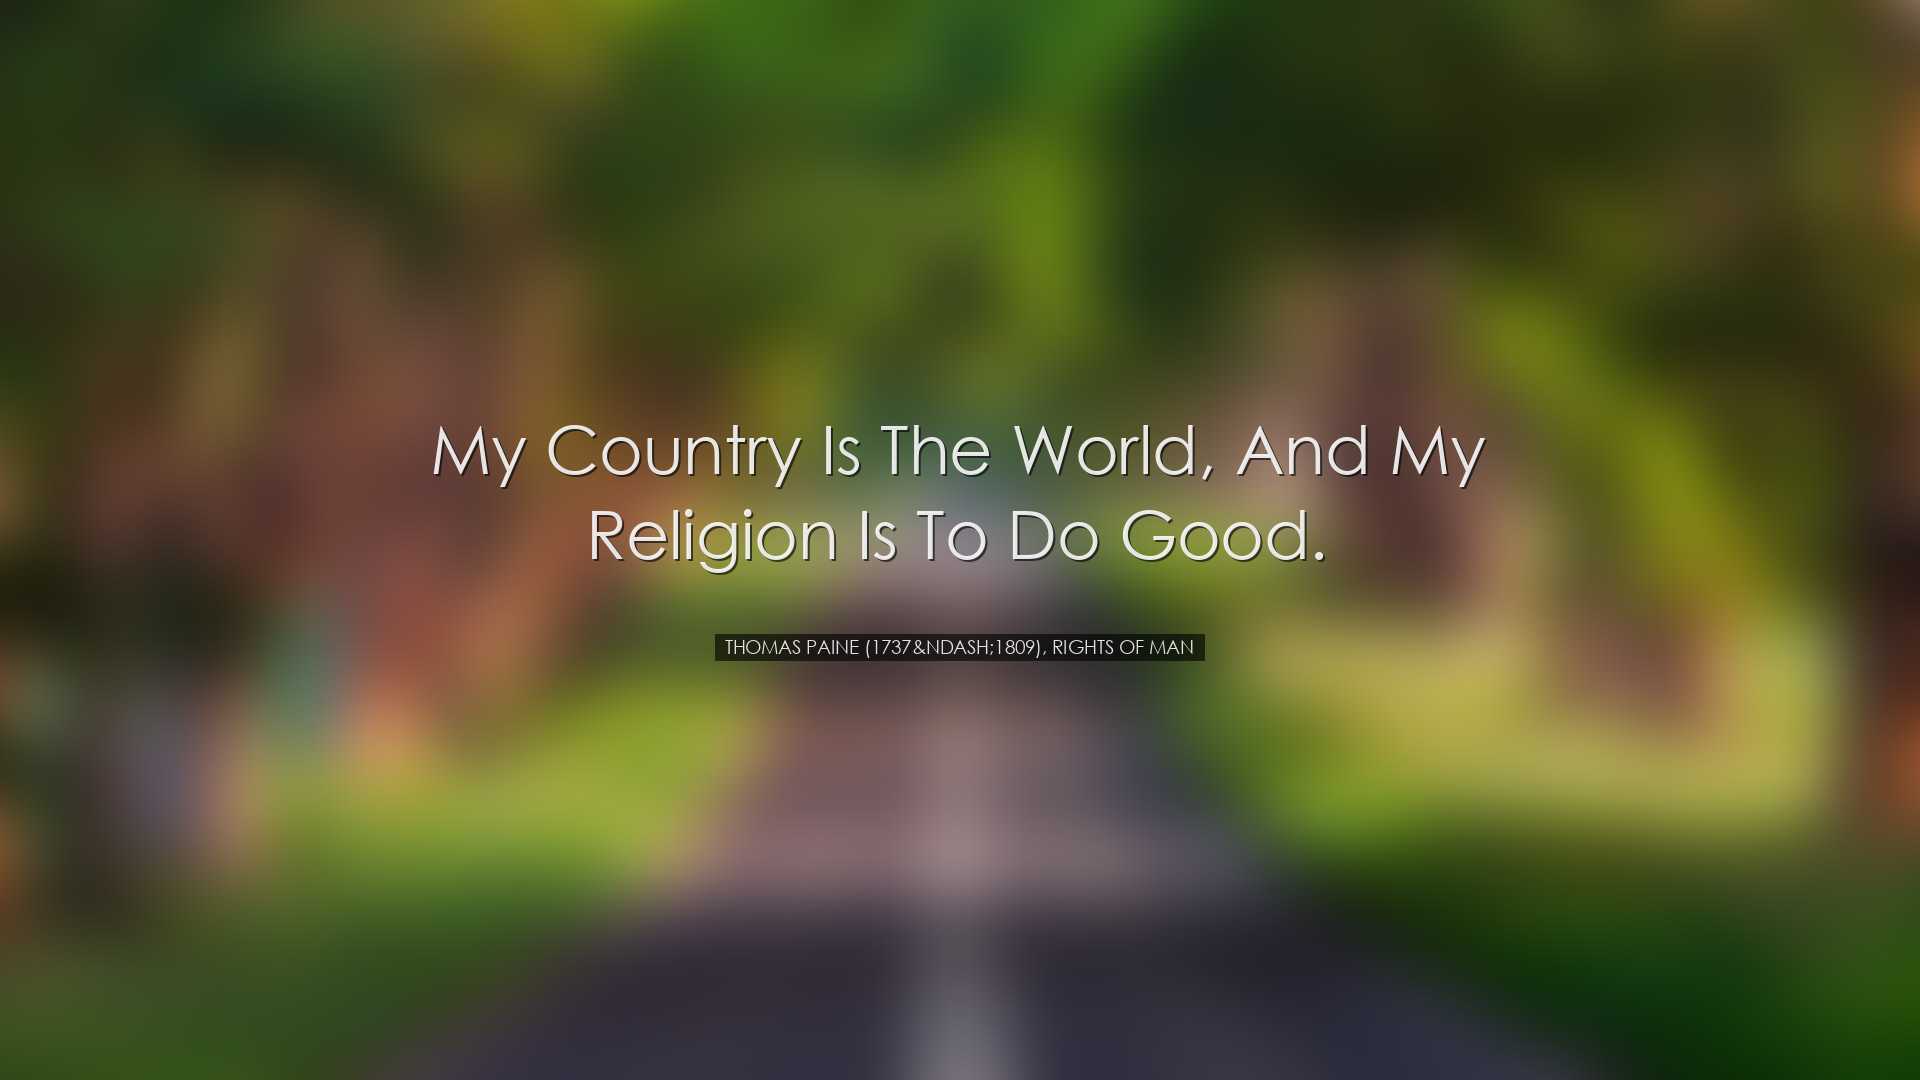 My country is the world, and my religion is to do good. - Thomas P